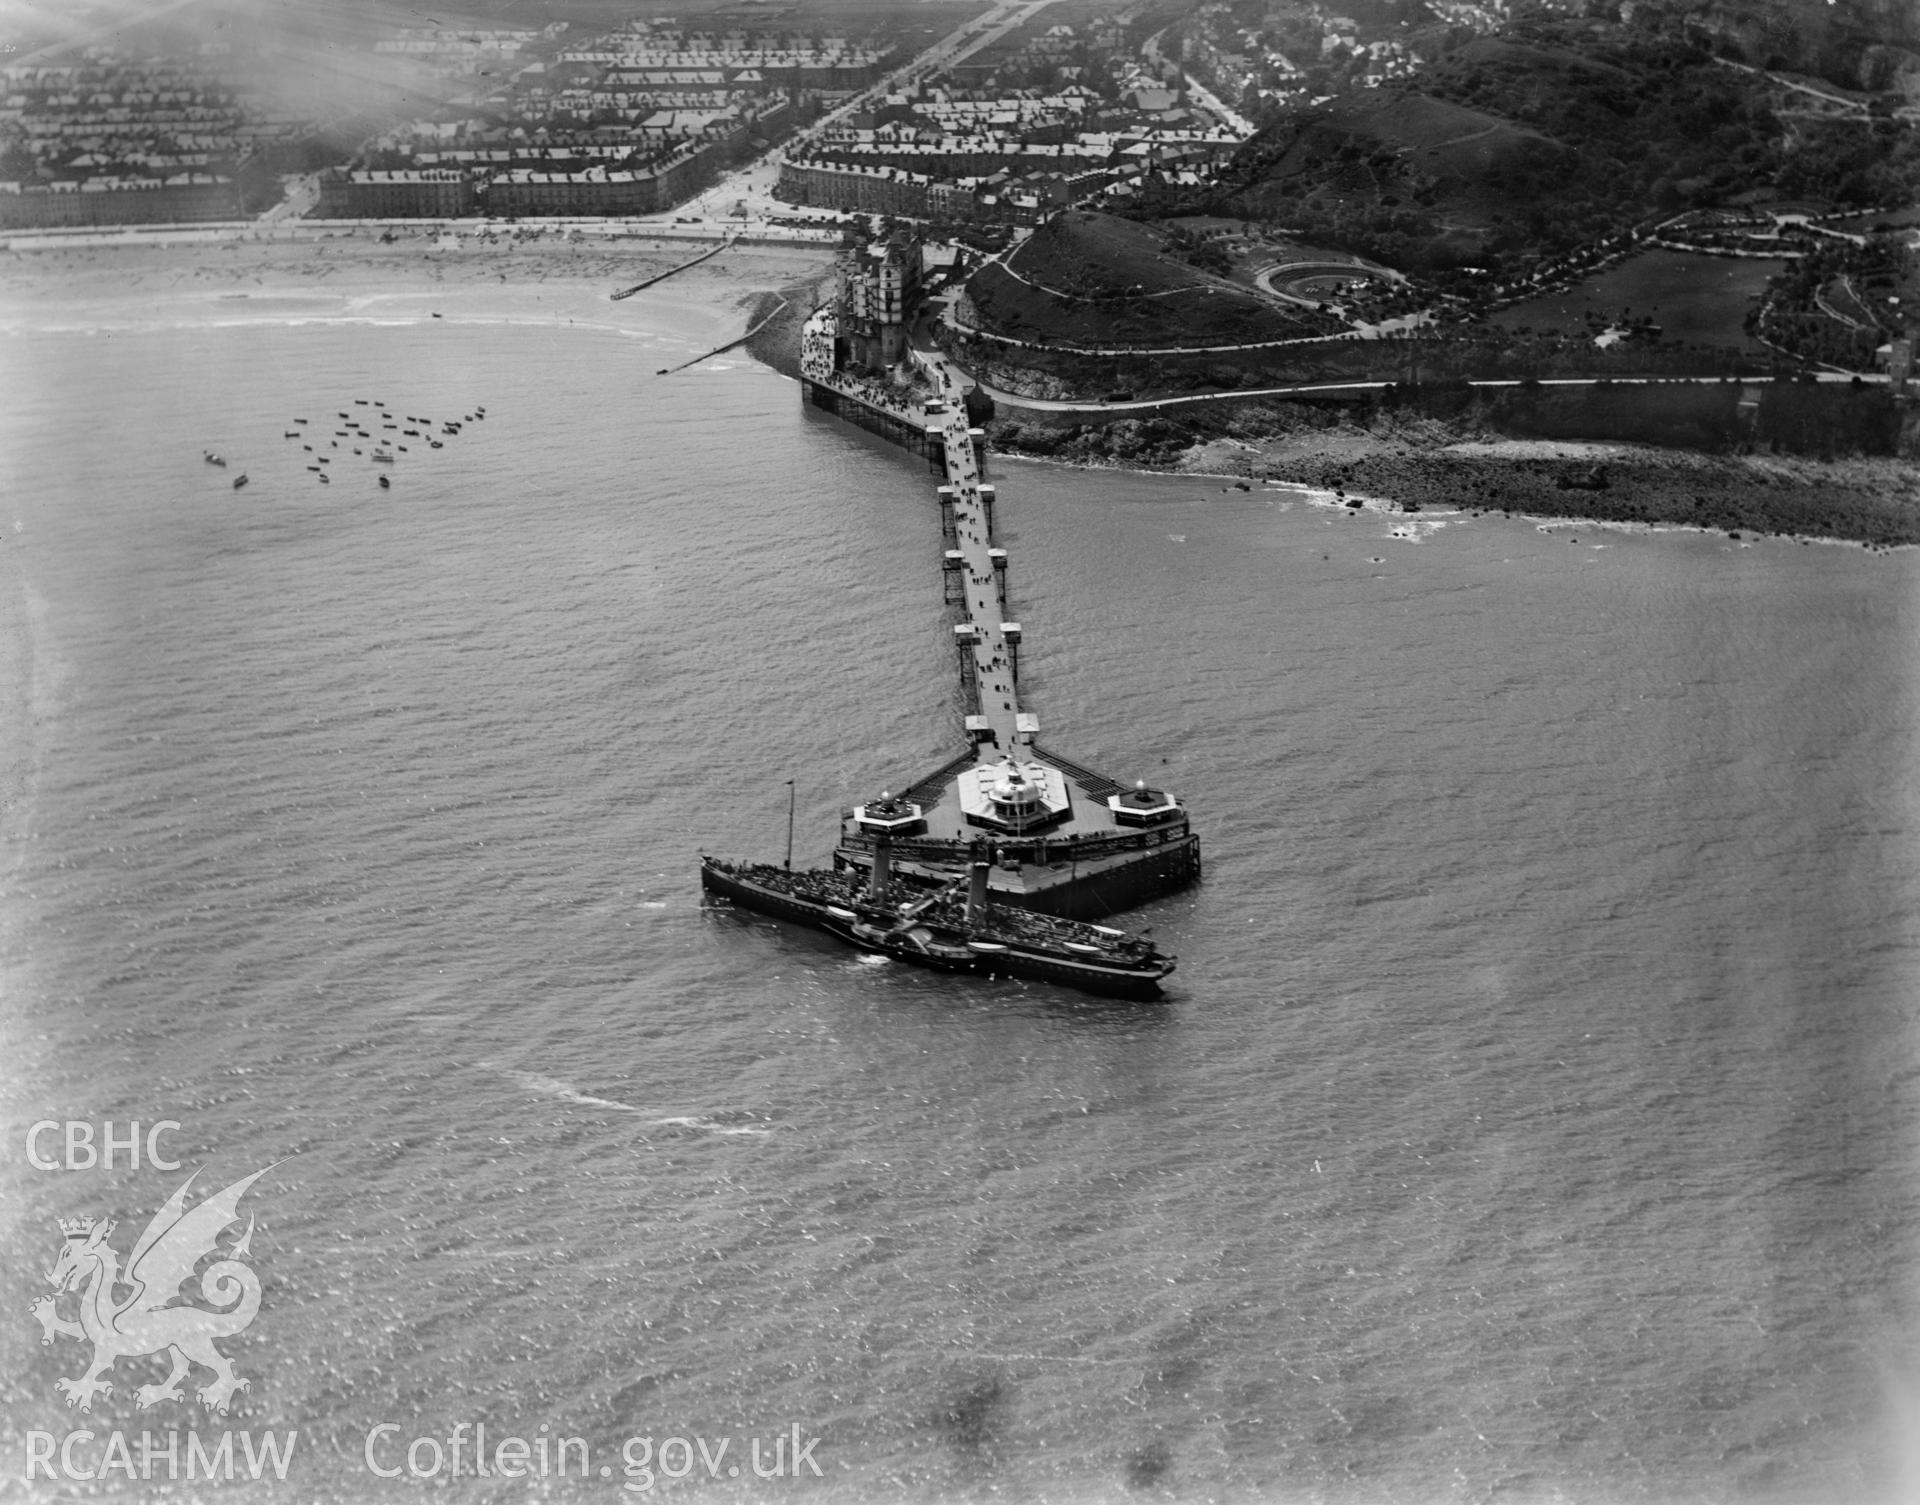 View of Llandudno showing pier and steam paddle ship, oblique aerial view. 5?x4? black and white glass plate negative.